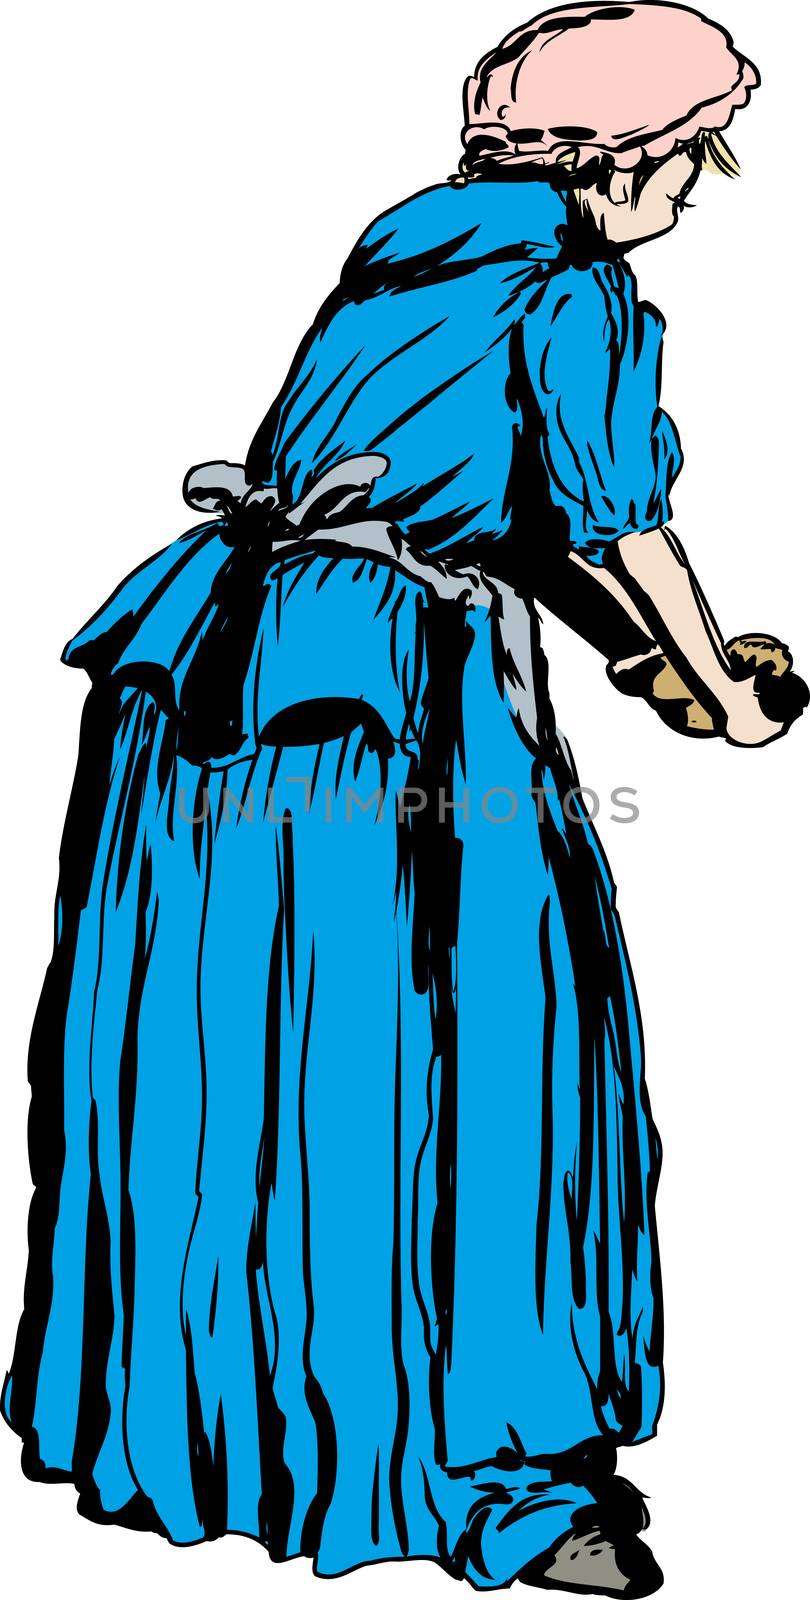 Illustration of rear view on single woman in 18th century clothing kneading dough